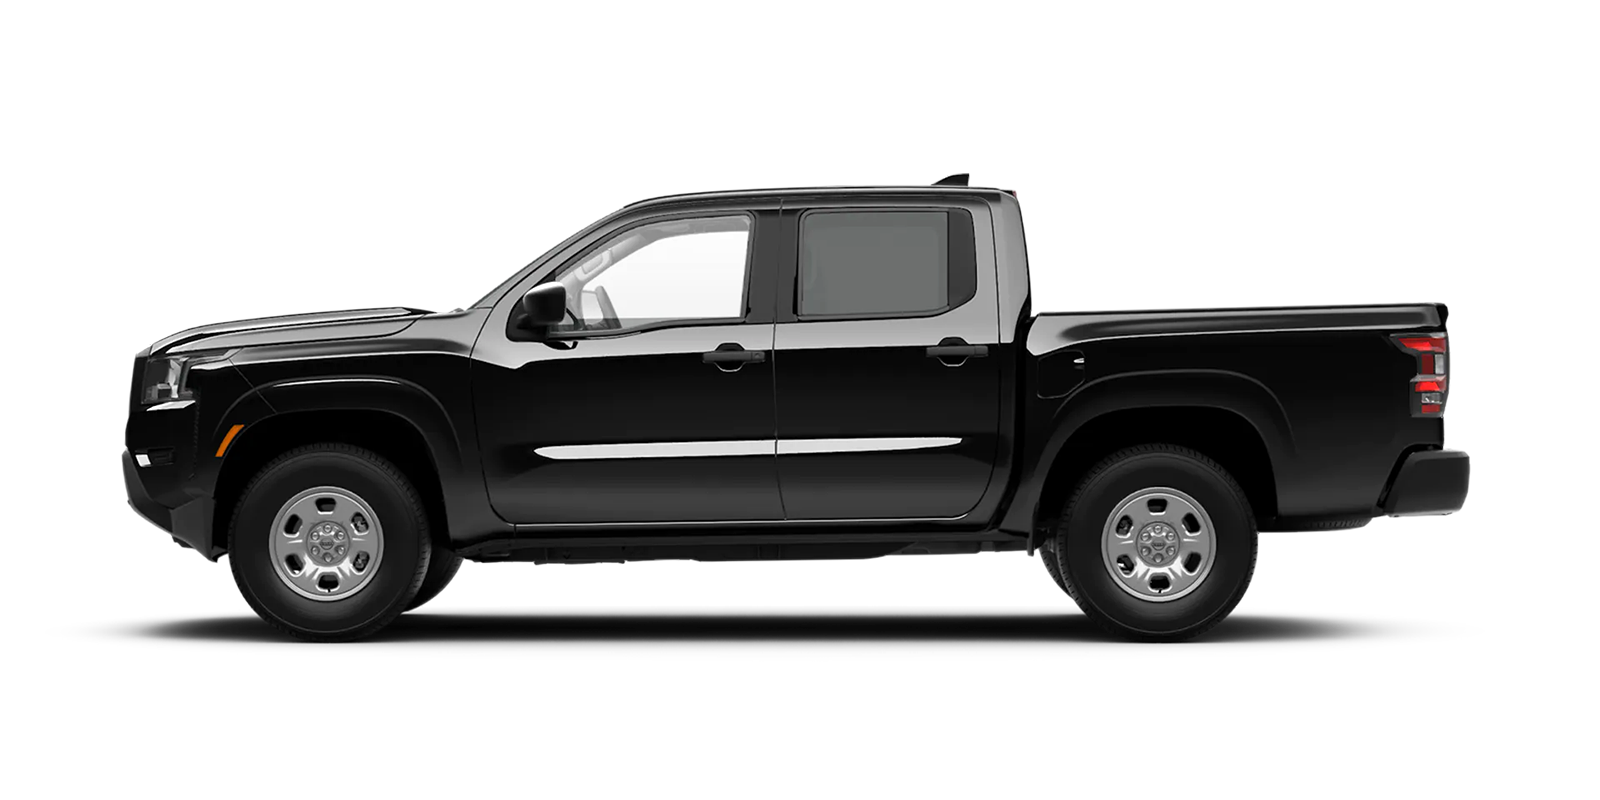 2022 Frontier Crew Cab S 4x2 in Super Black | Nissan of Pittsfield in Pittsfield MA